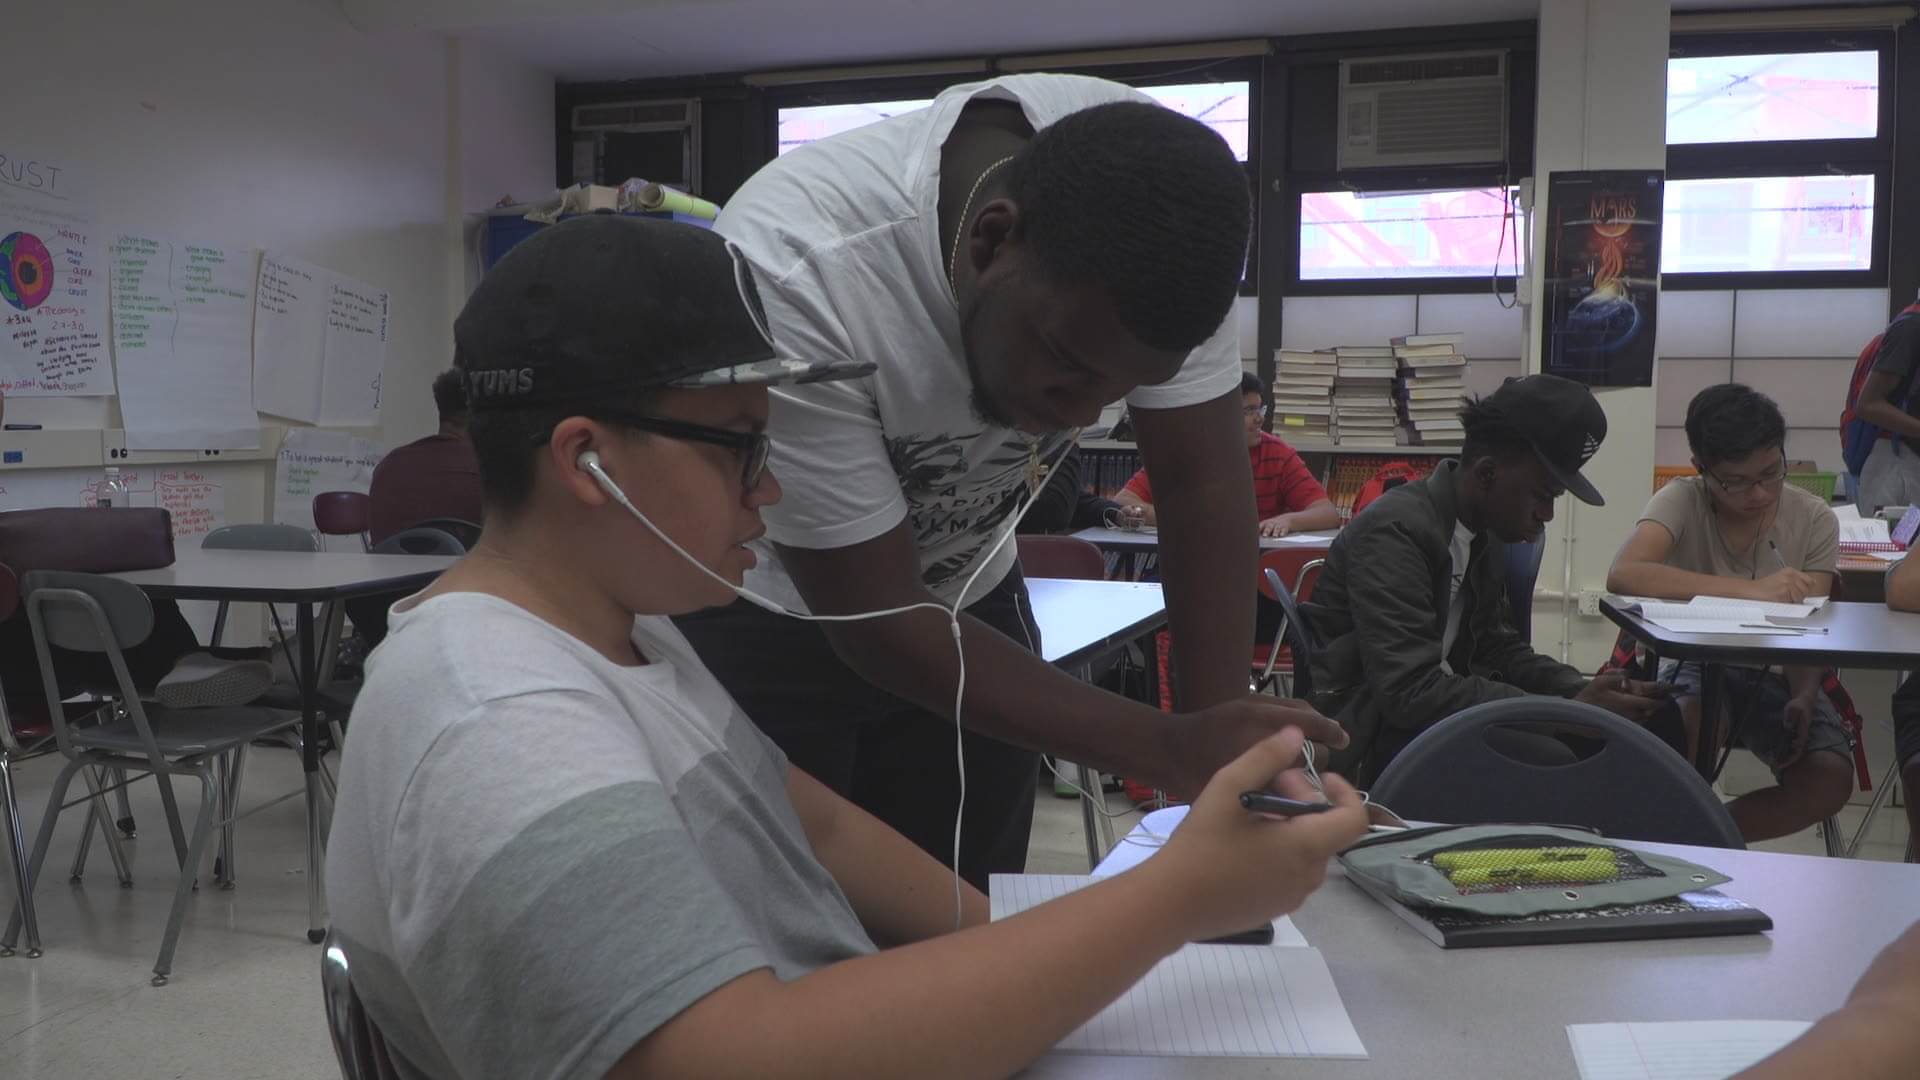 Still from Kids Can Spit. Two male high school students share wired earbuds. One student is sitting at a desk and holds a pen as he looks at a lined white sheet of paper. The other student is standing upright and leaning over the desk, also looking at the paper. Behind them, other students are sitting at desks.